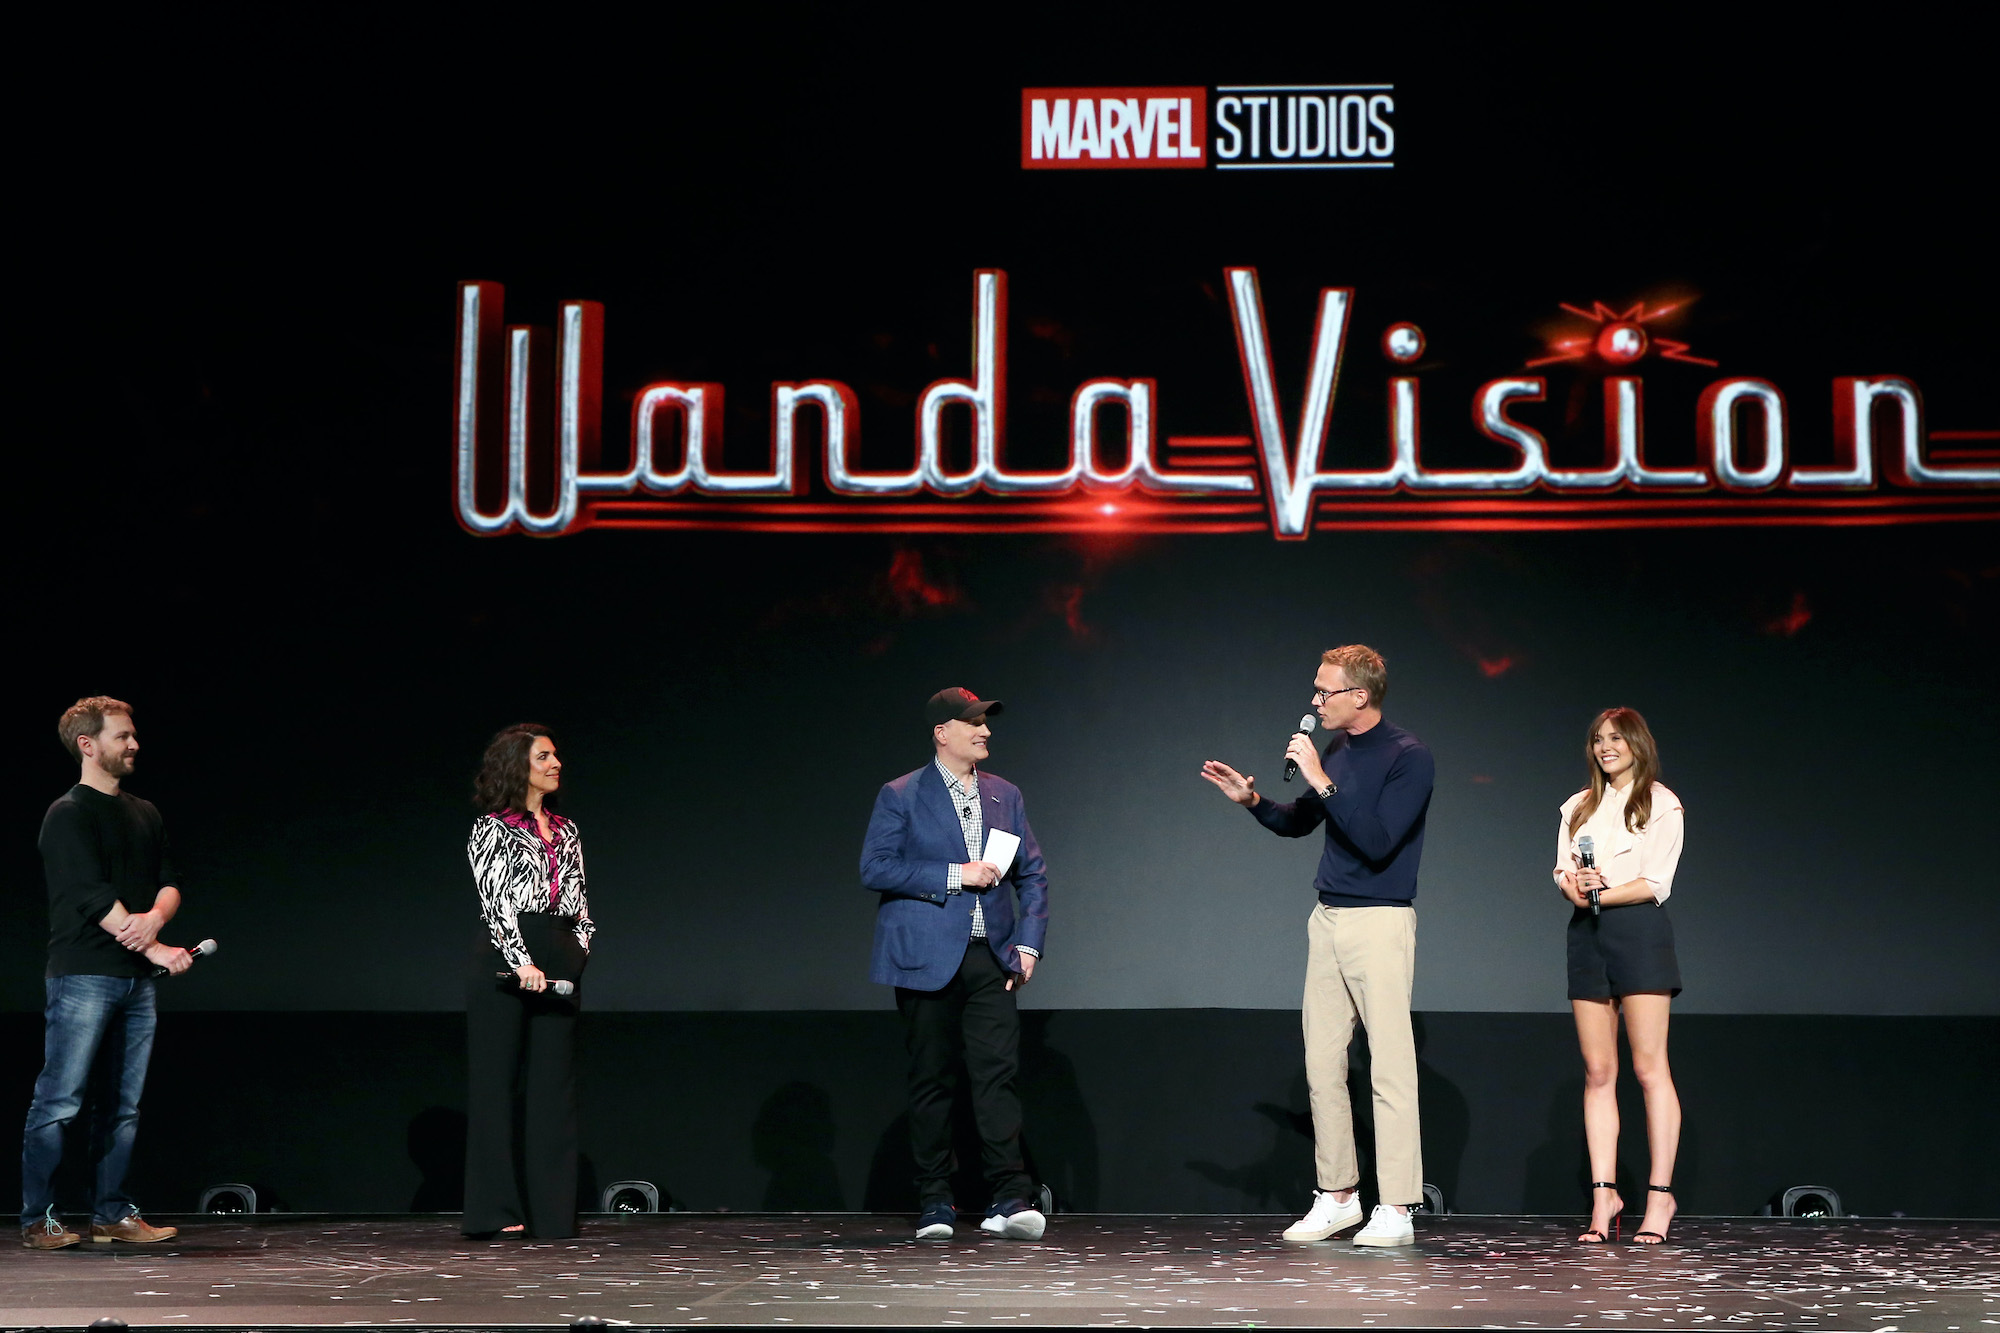 Can You Watch ‘WandaVision’ If You’ve Never Seen an MCU Movie or Show?